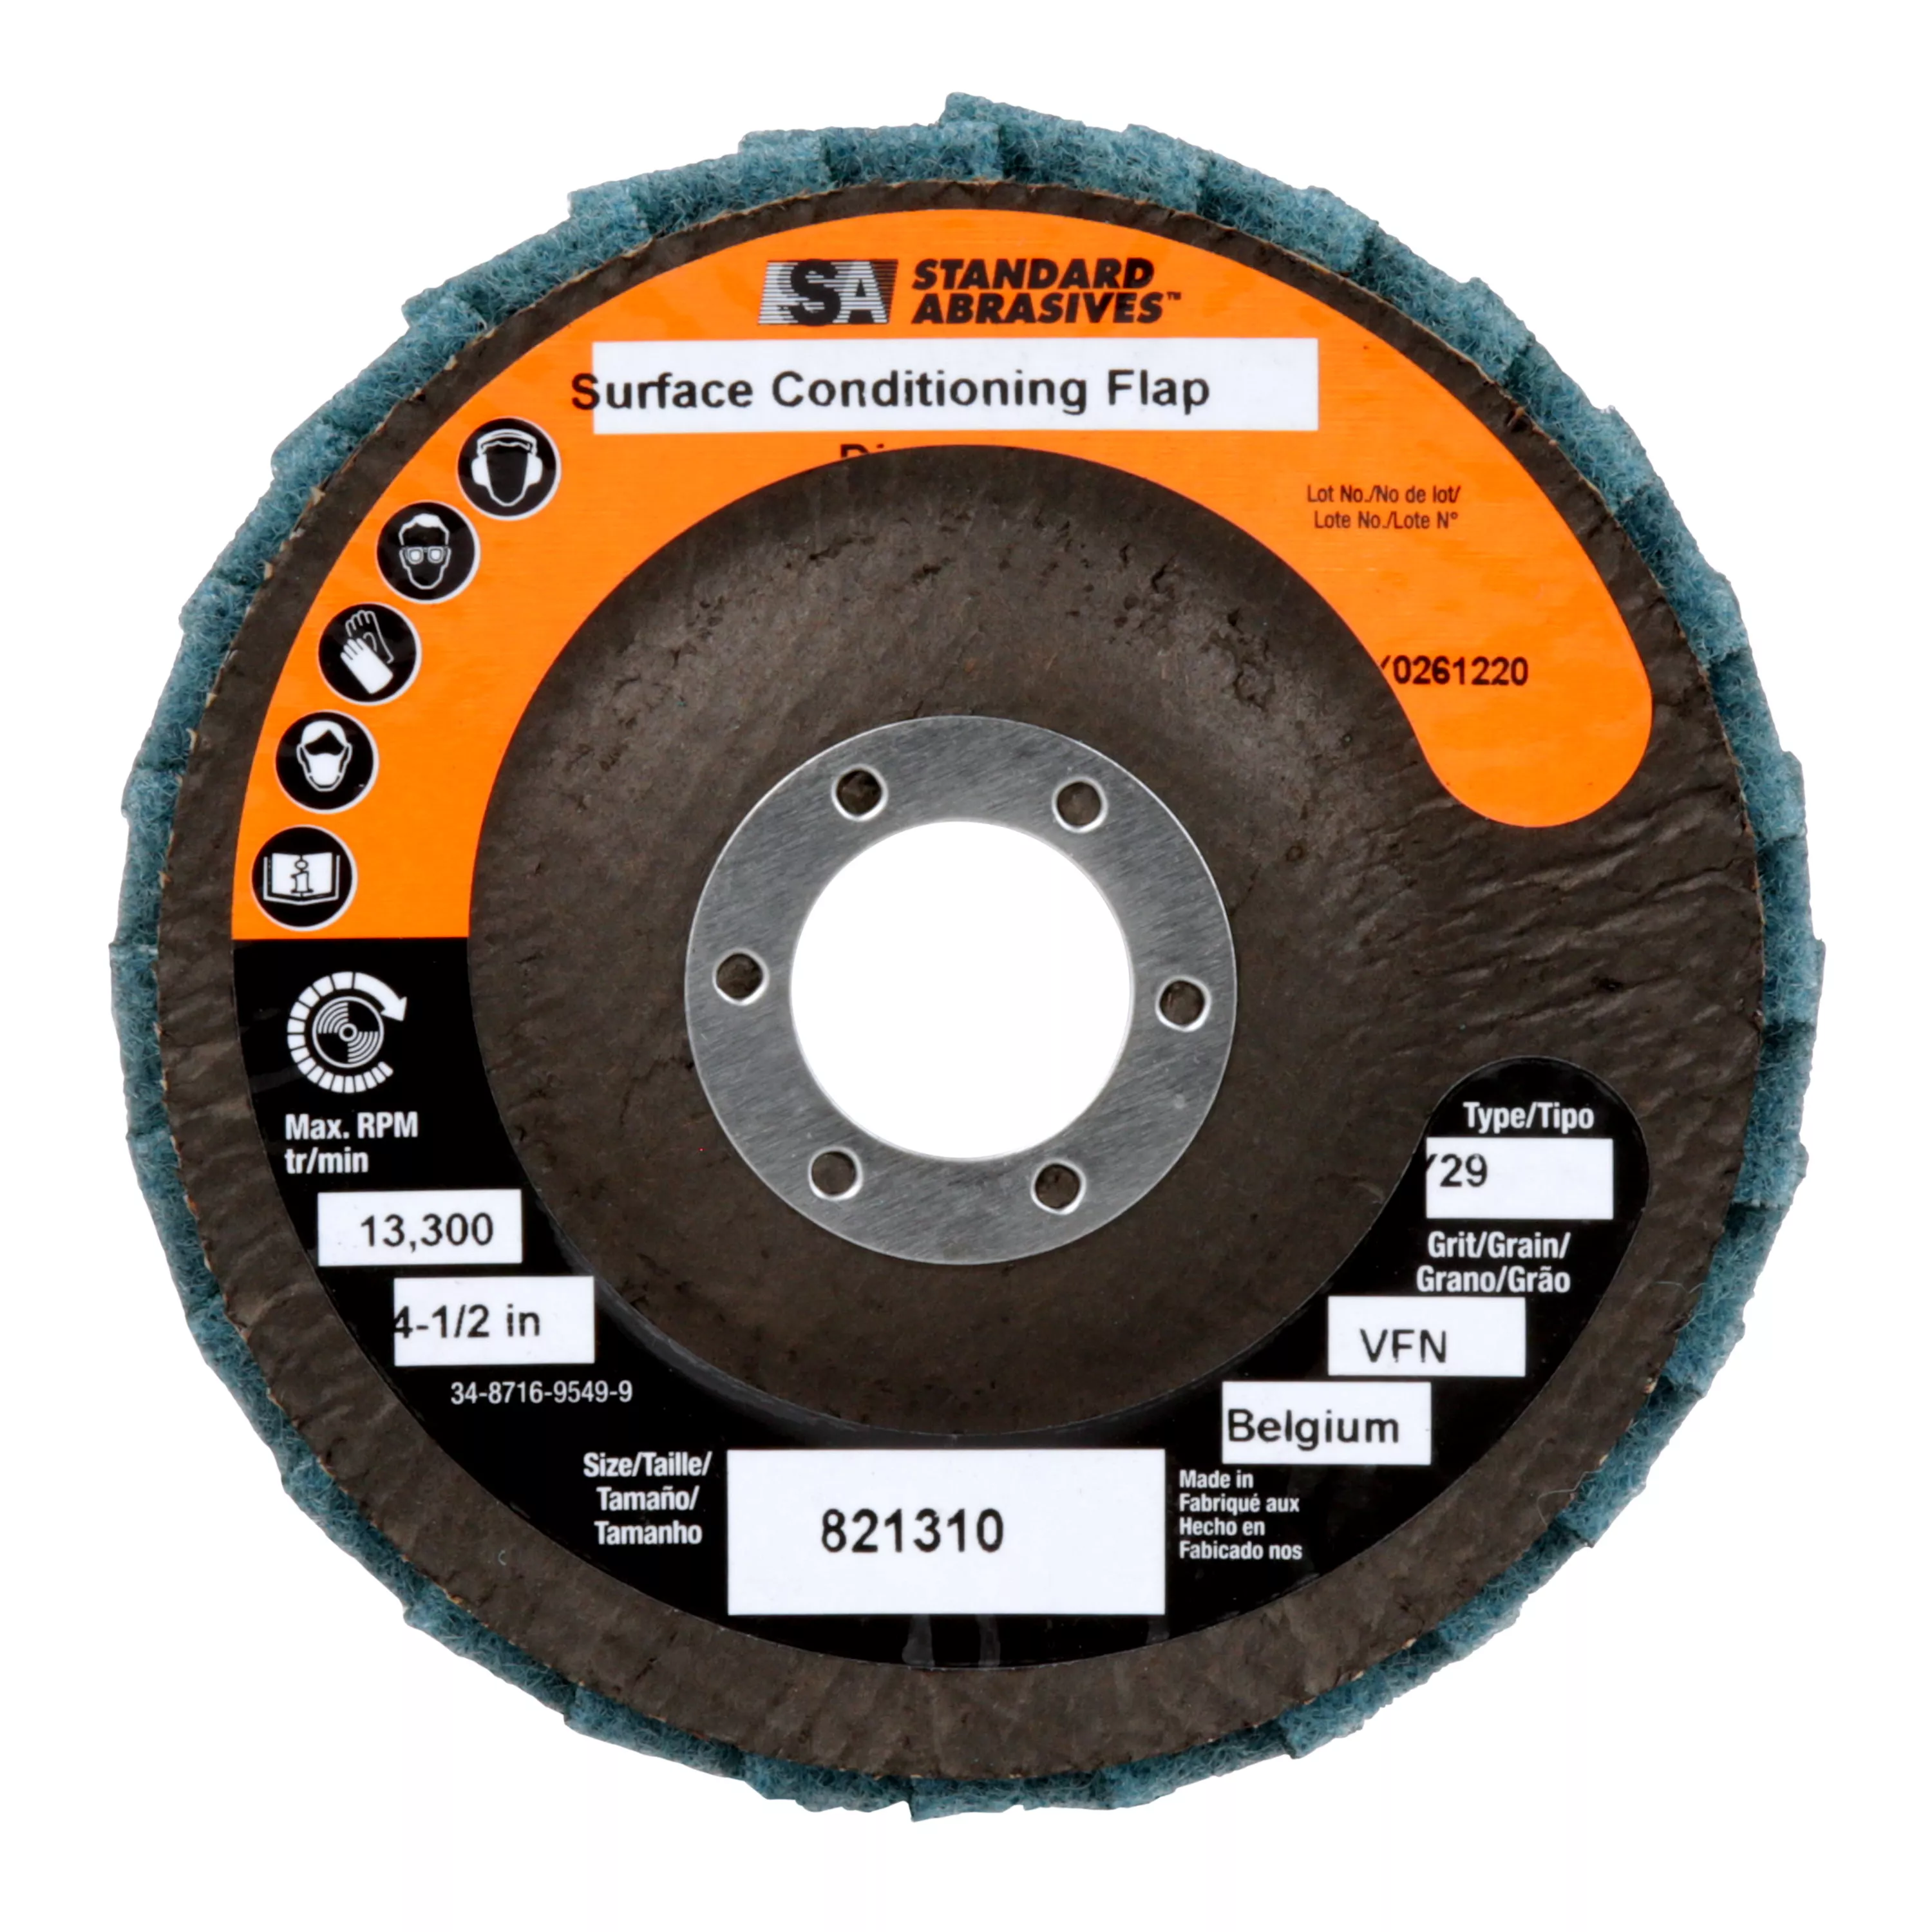 Standard Abrasives™ Surface Conditioning Flap Disc, 821310, 4-1/2 in x
7/8 in VFN, 5/Carton, 50 ea/Case